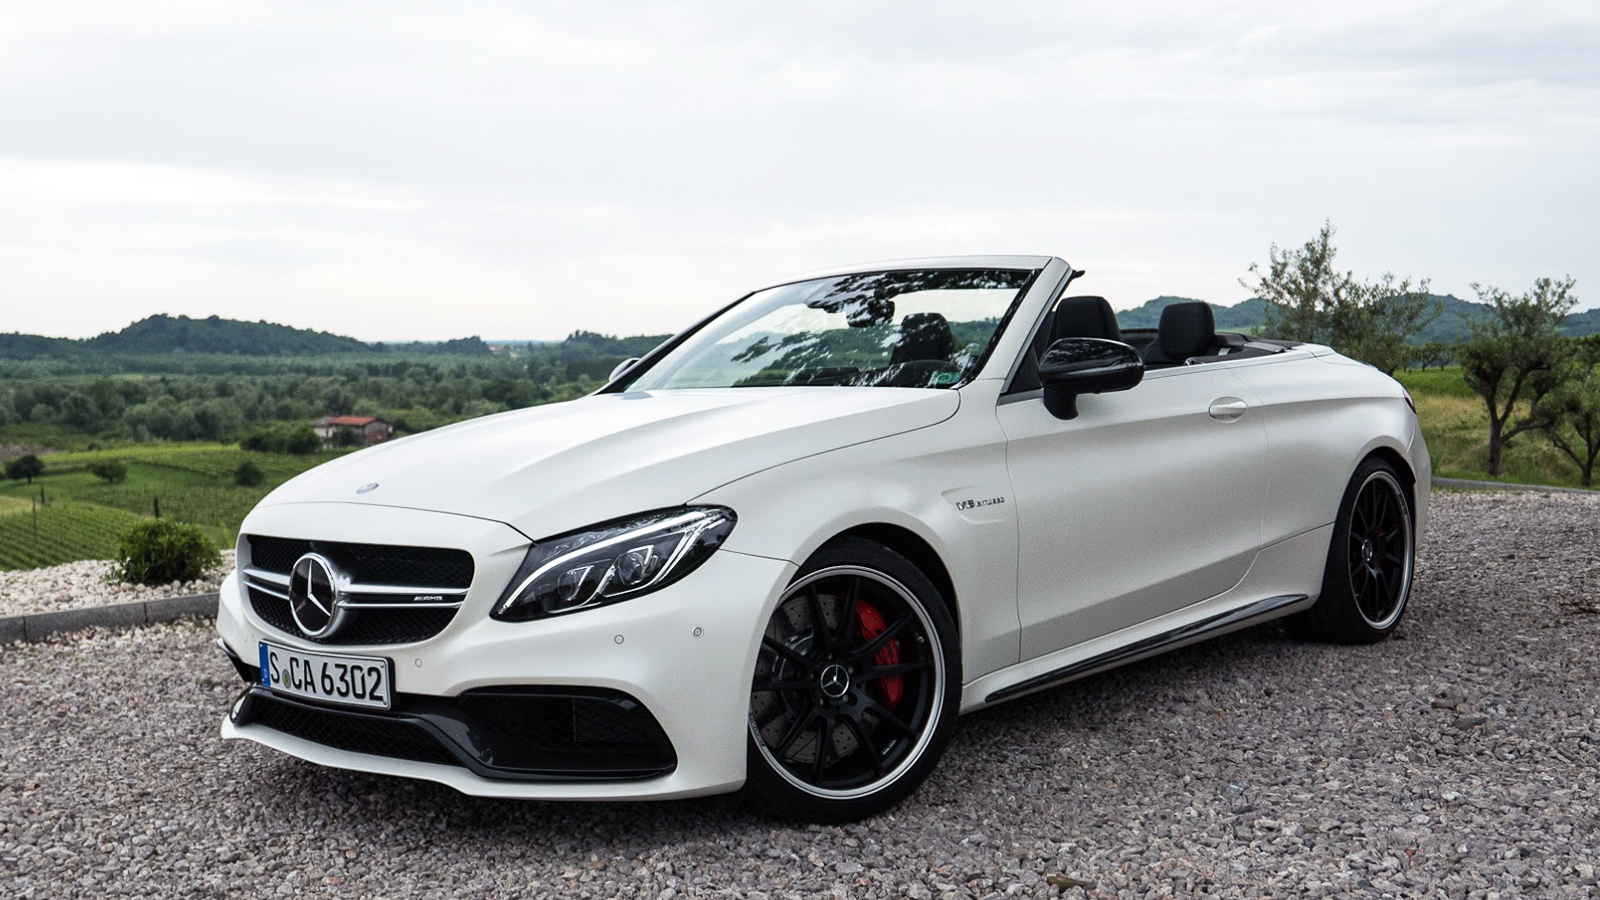 Can You Afford a Mercedes-Benz on Your Income? - MBWorld